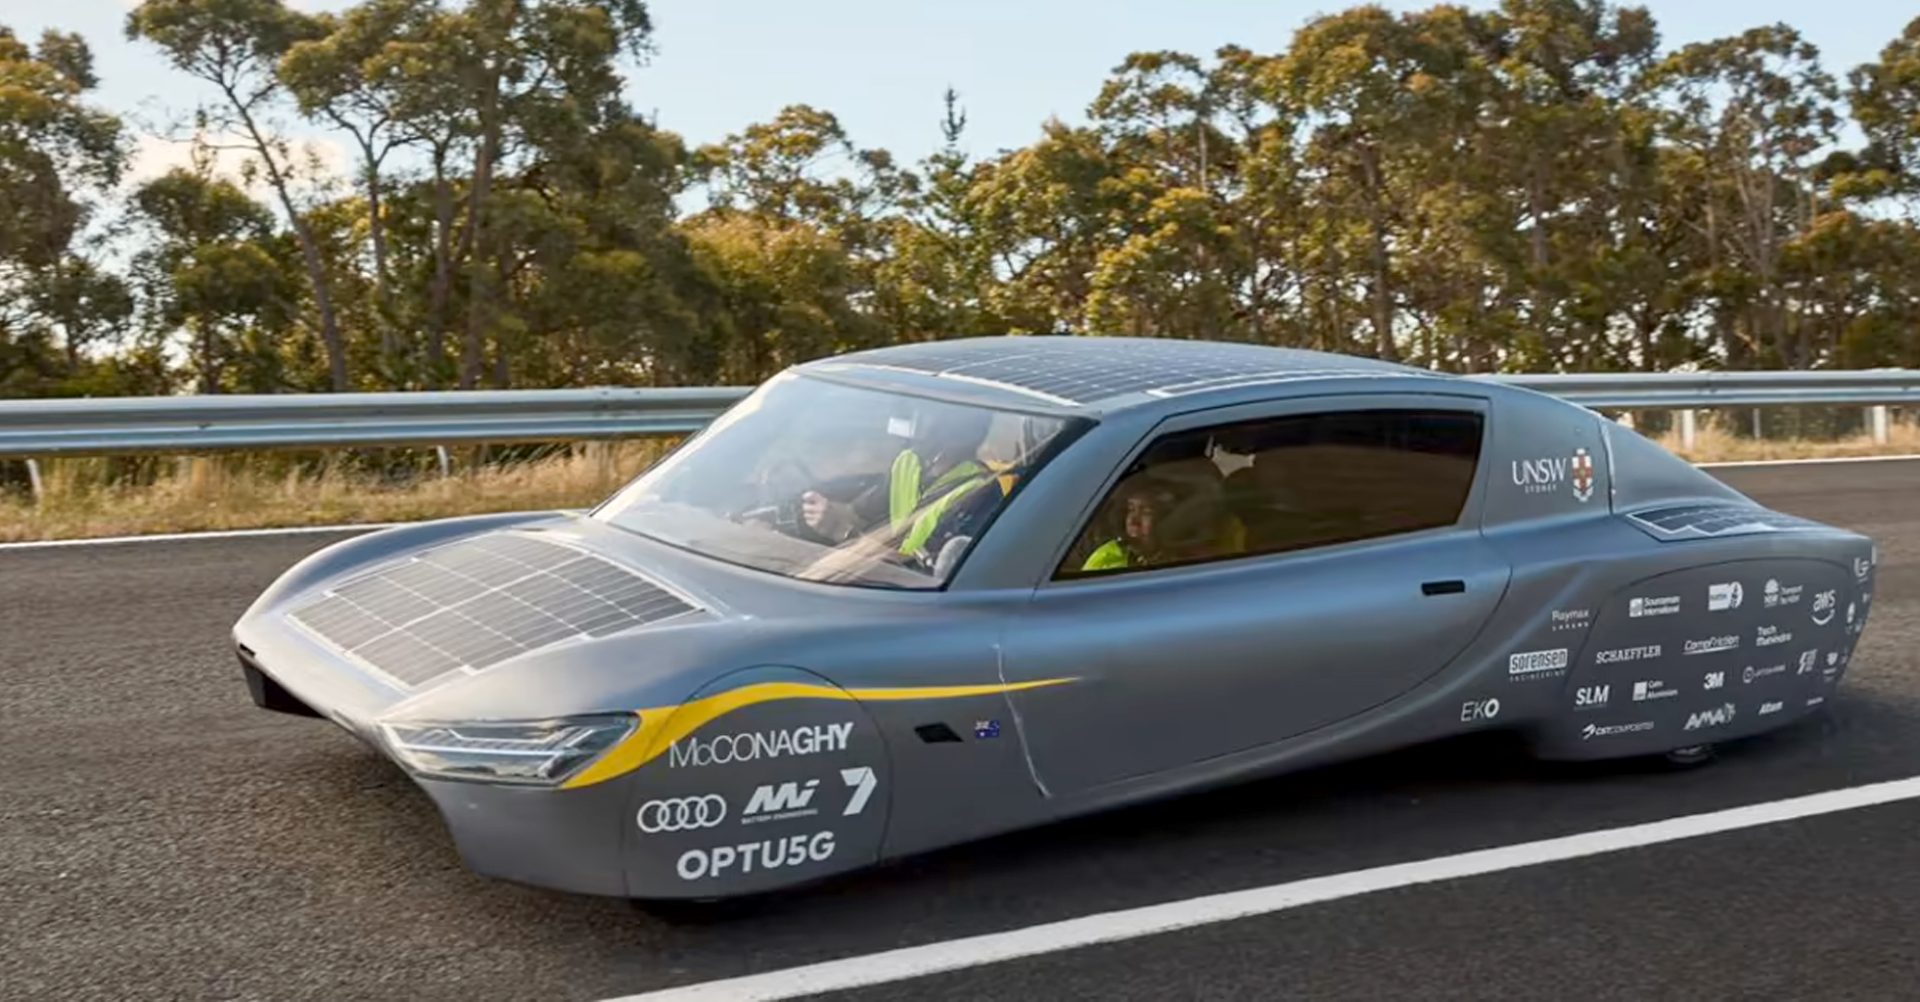 Solar-powered car claims new EV speed record over 1,000 km